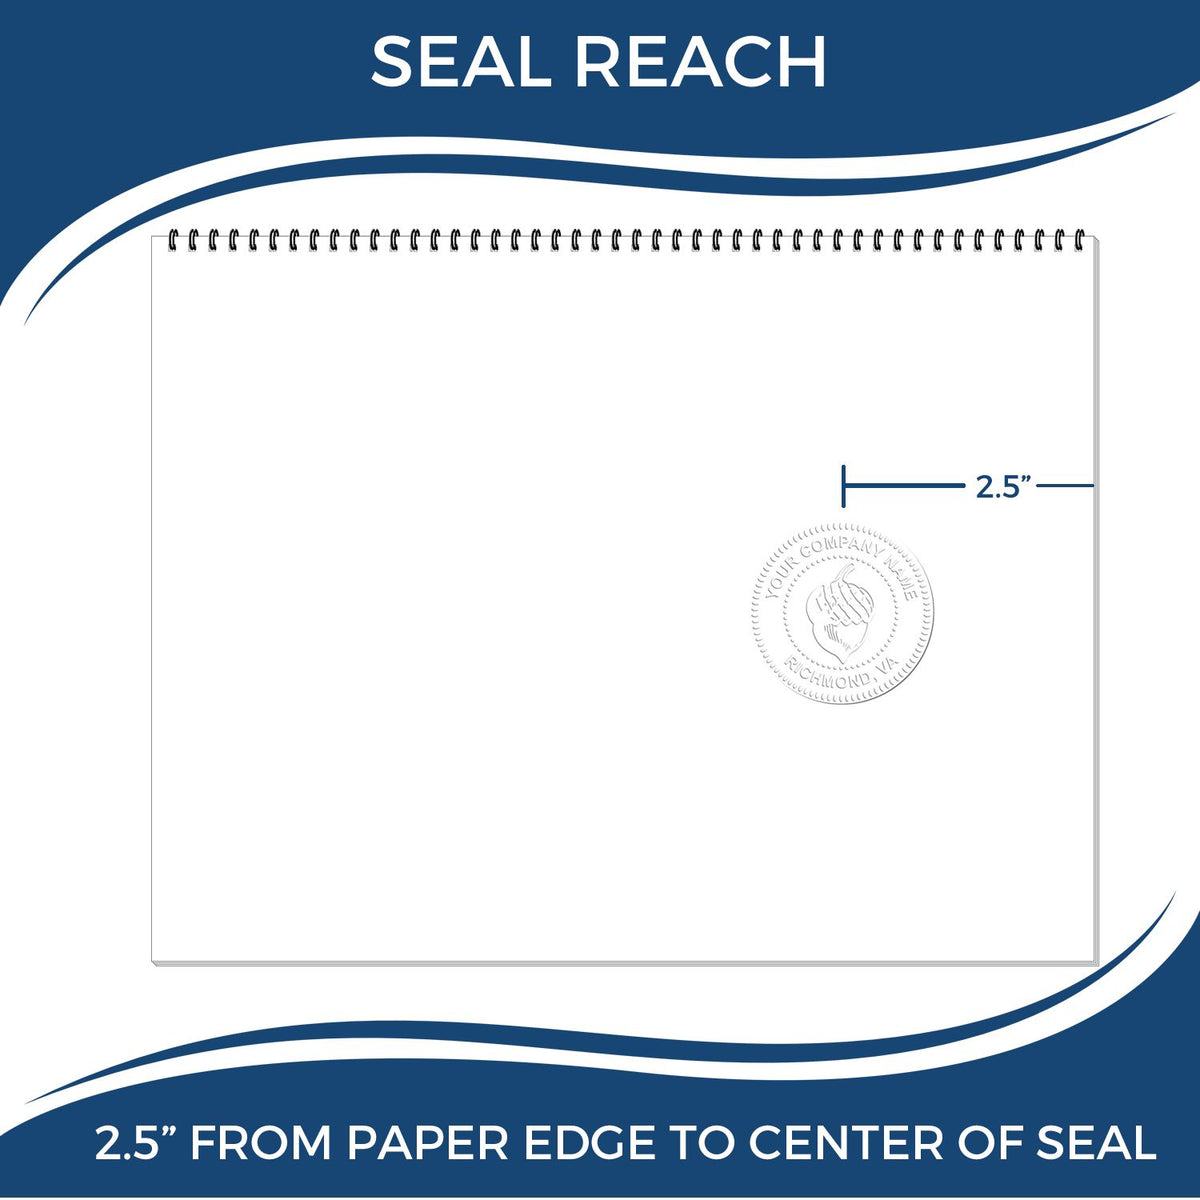 An infographic showing the seal reach which is represented by a ruler and a miniature seal image of the Heavy Duty Cast Iron New York Geologist Seal Embosser